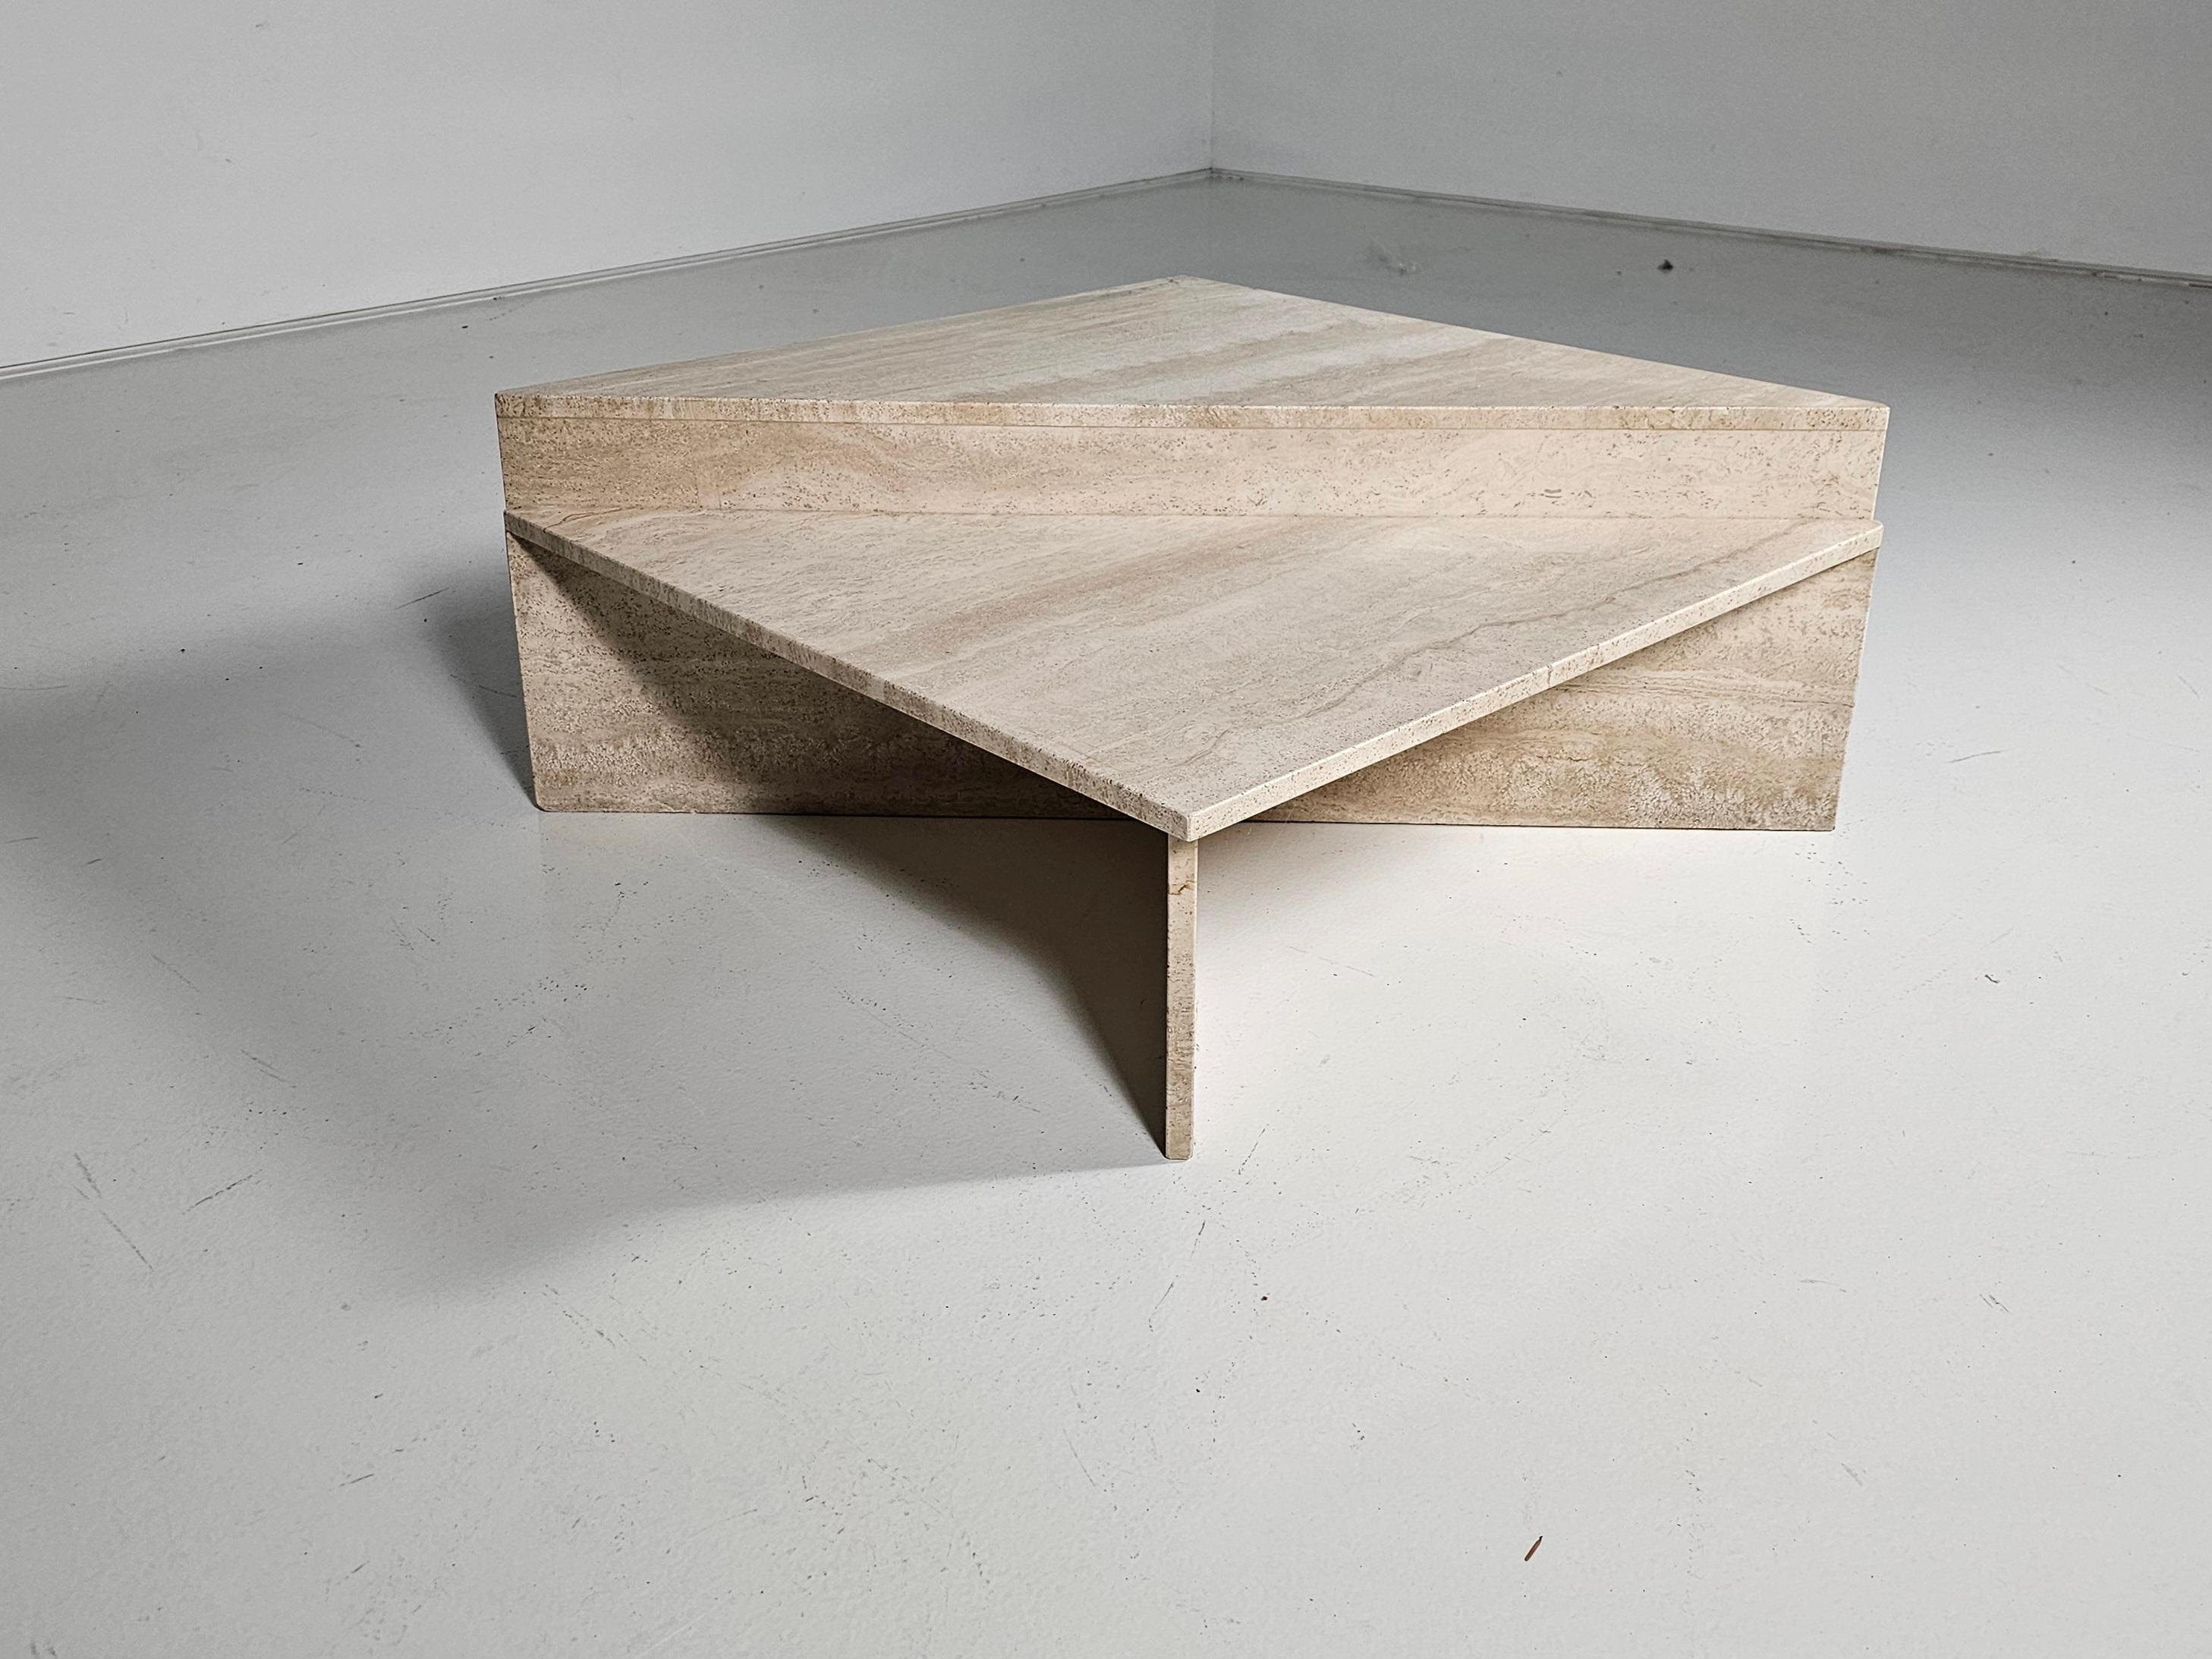 Two Part Travertine Modular Coffee Table by Up & Up, circa 1970s For Sale 4